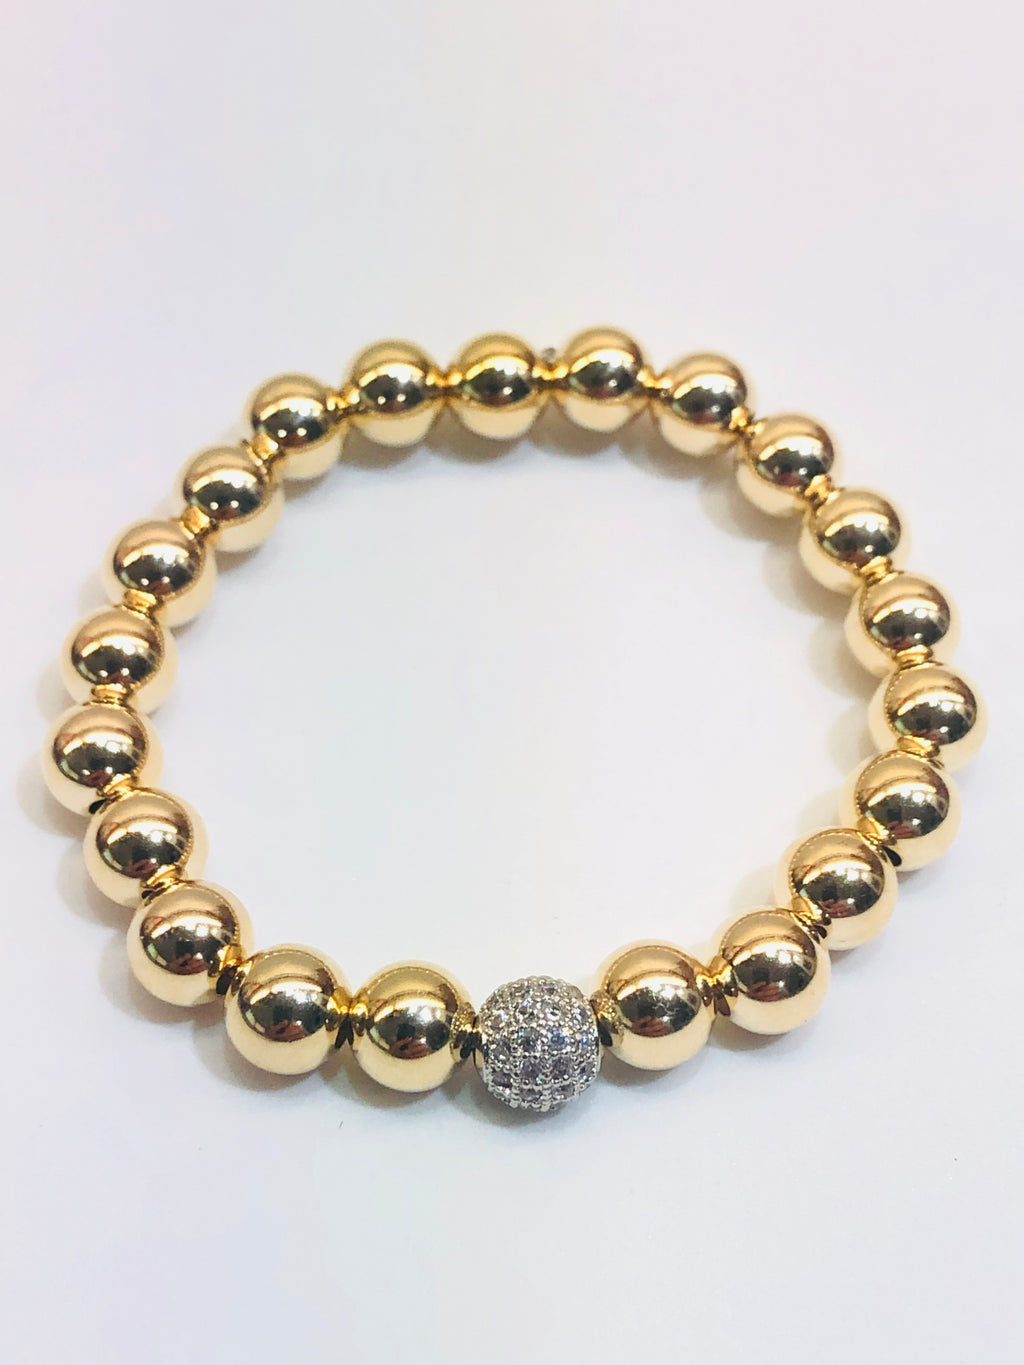 8mm 14kt Gold Filled Bead Bracelet with 8mm Jeweled Disco Ball